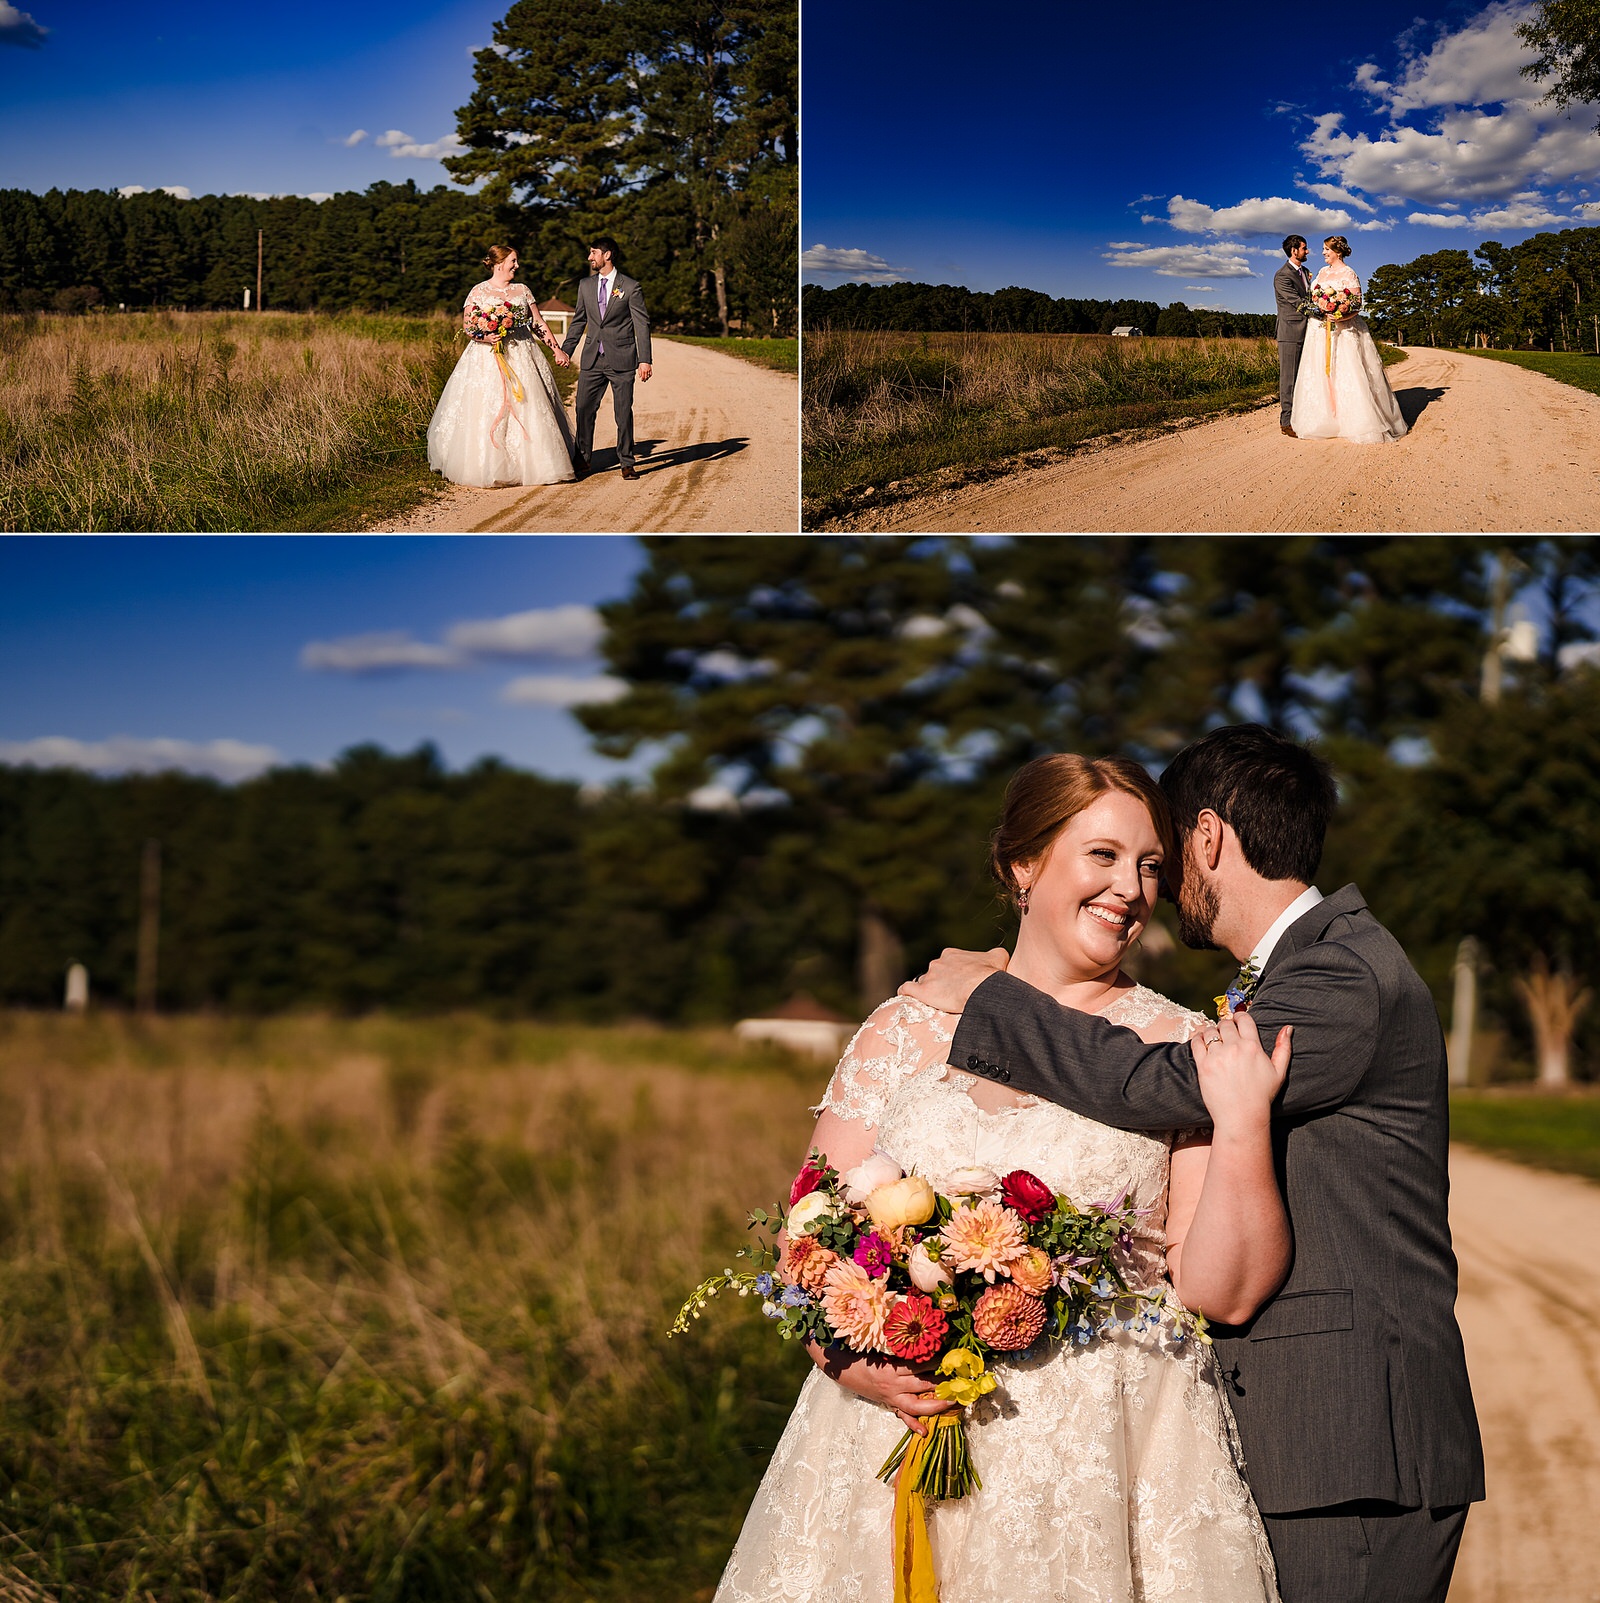 Portraits of a bride and groom on a gorgeous wedding day at The Meadows Raleigh